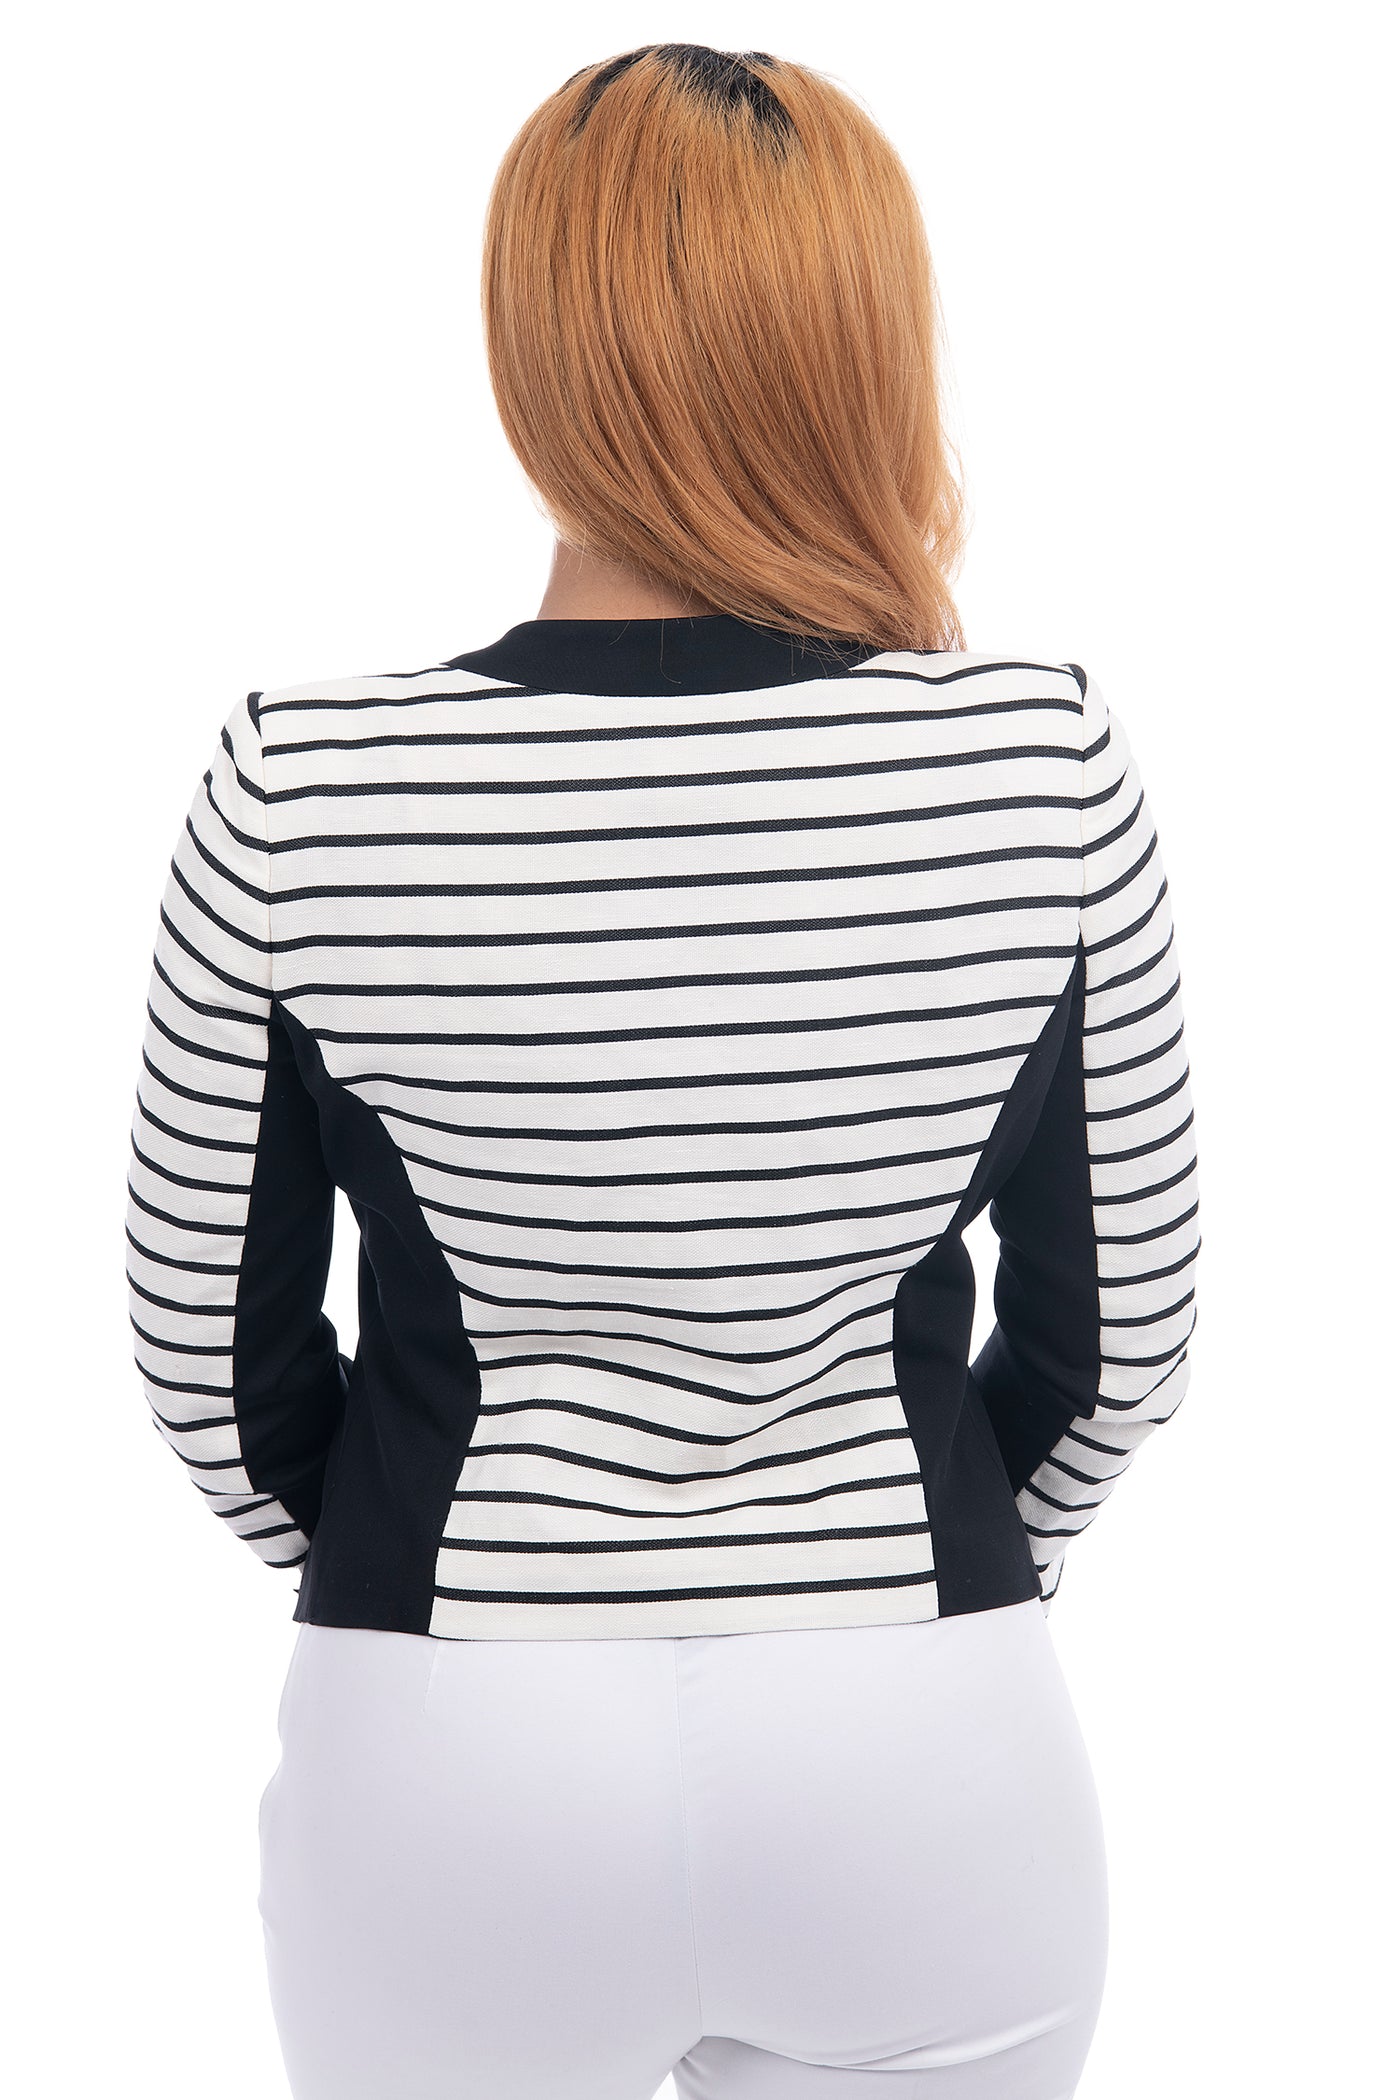 Pinko stripped cropped blazer with beading and ribbon detailing